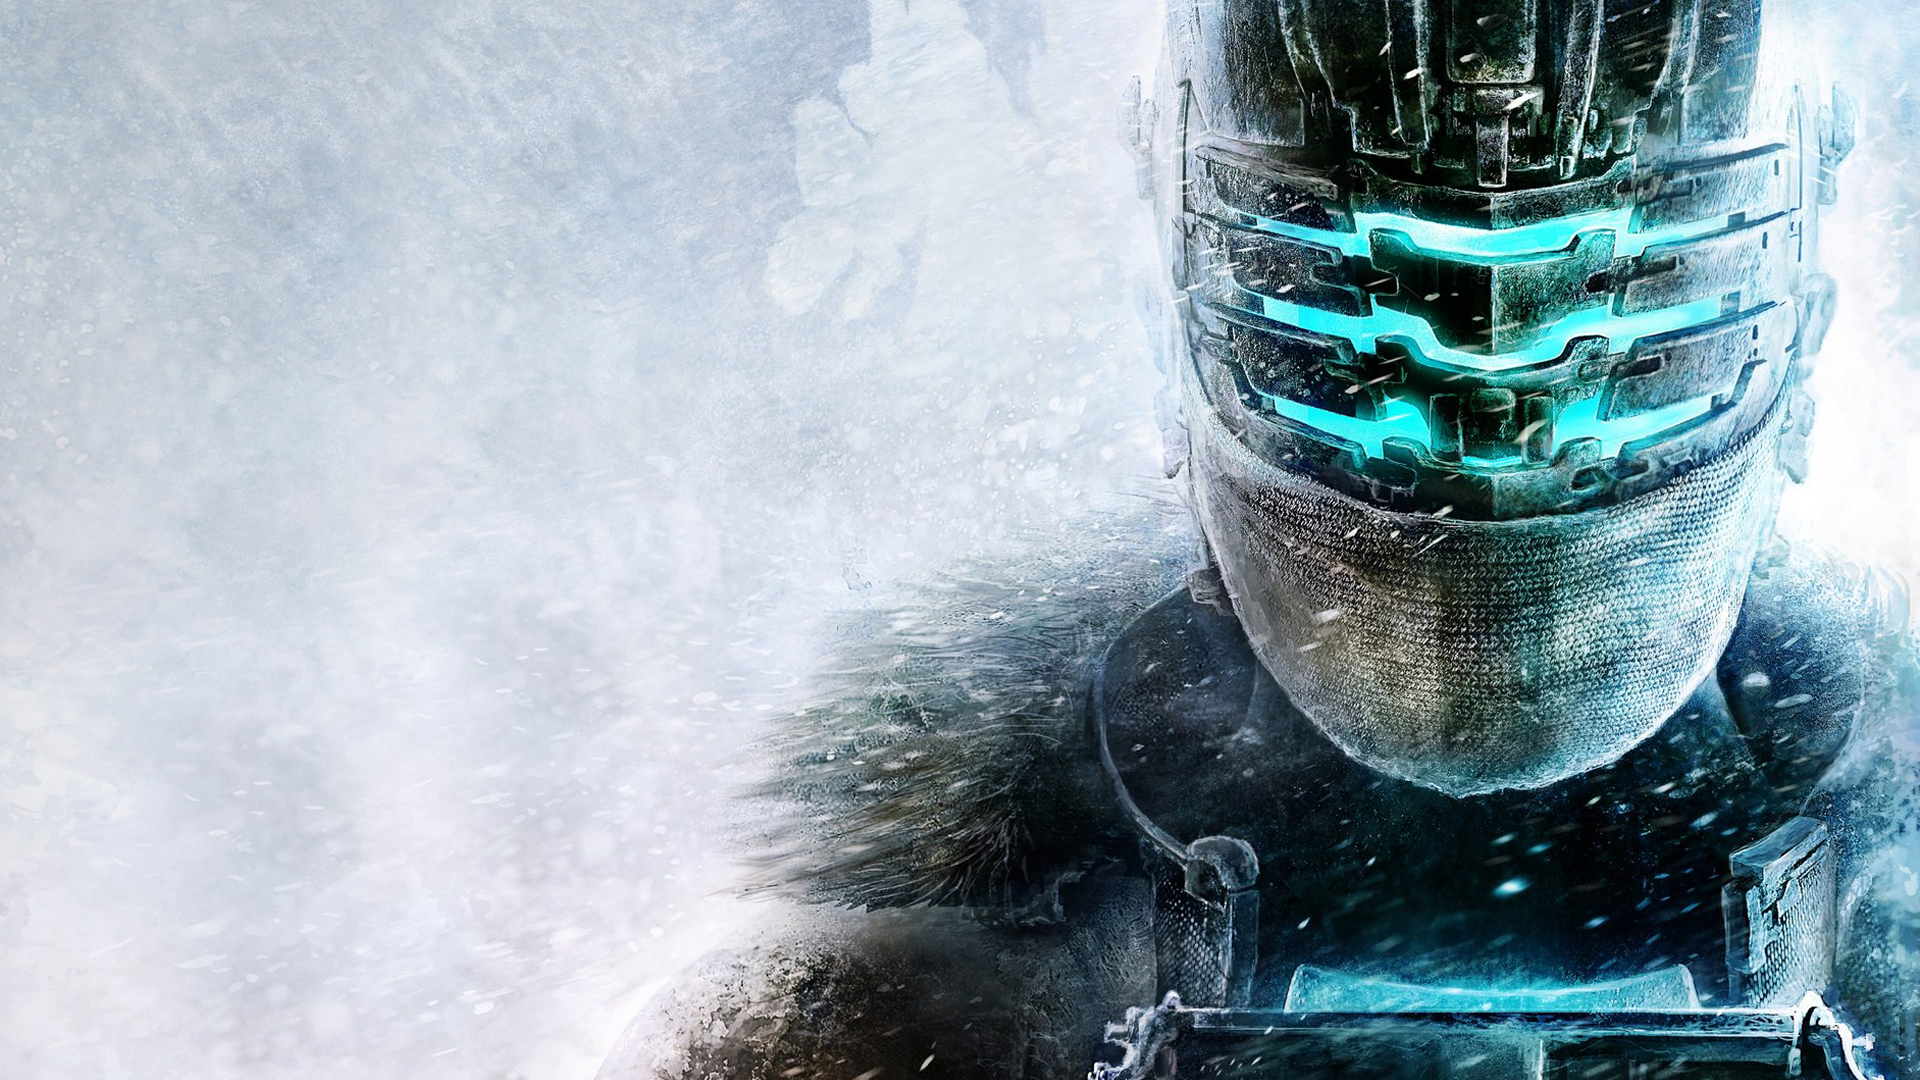 video game, dead space 3, isaac clarke, dead space